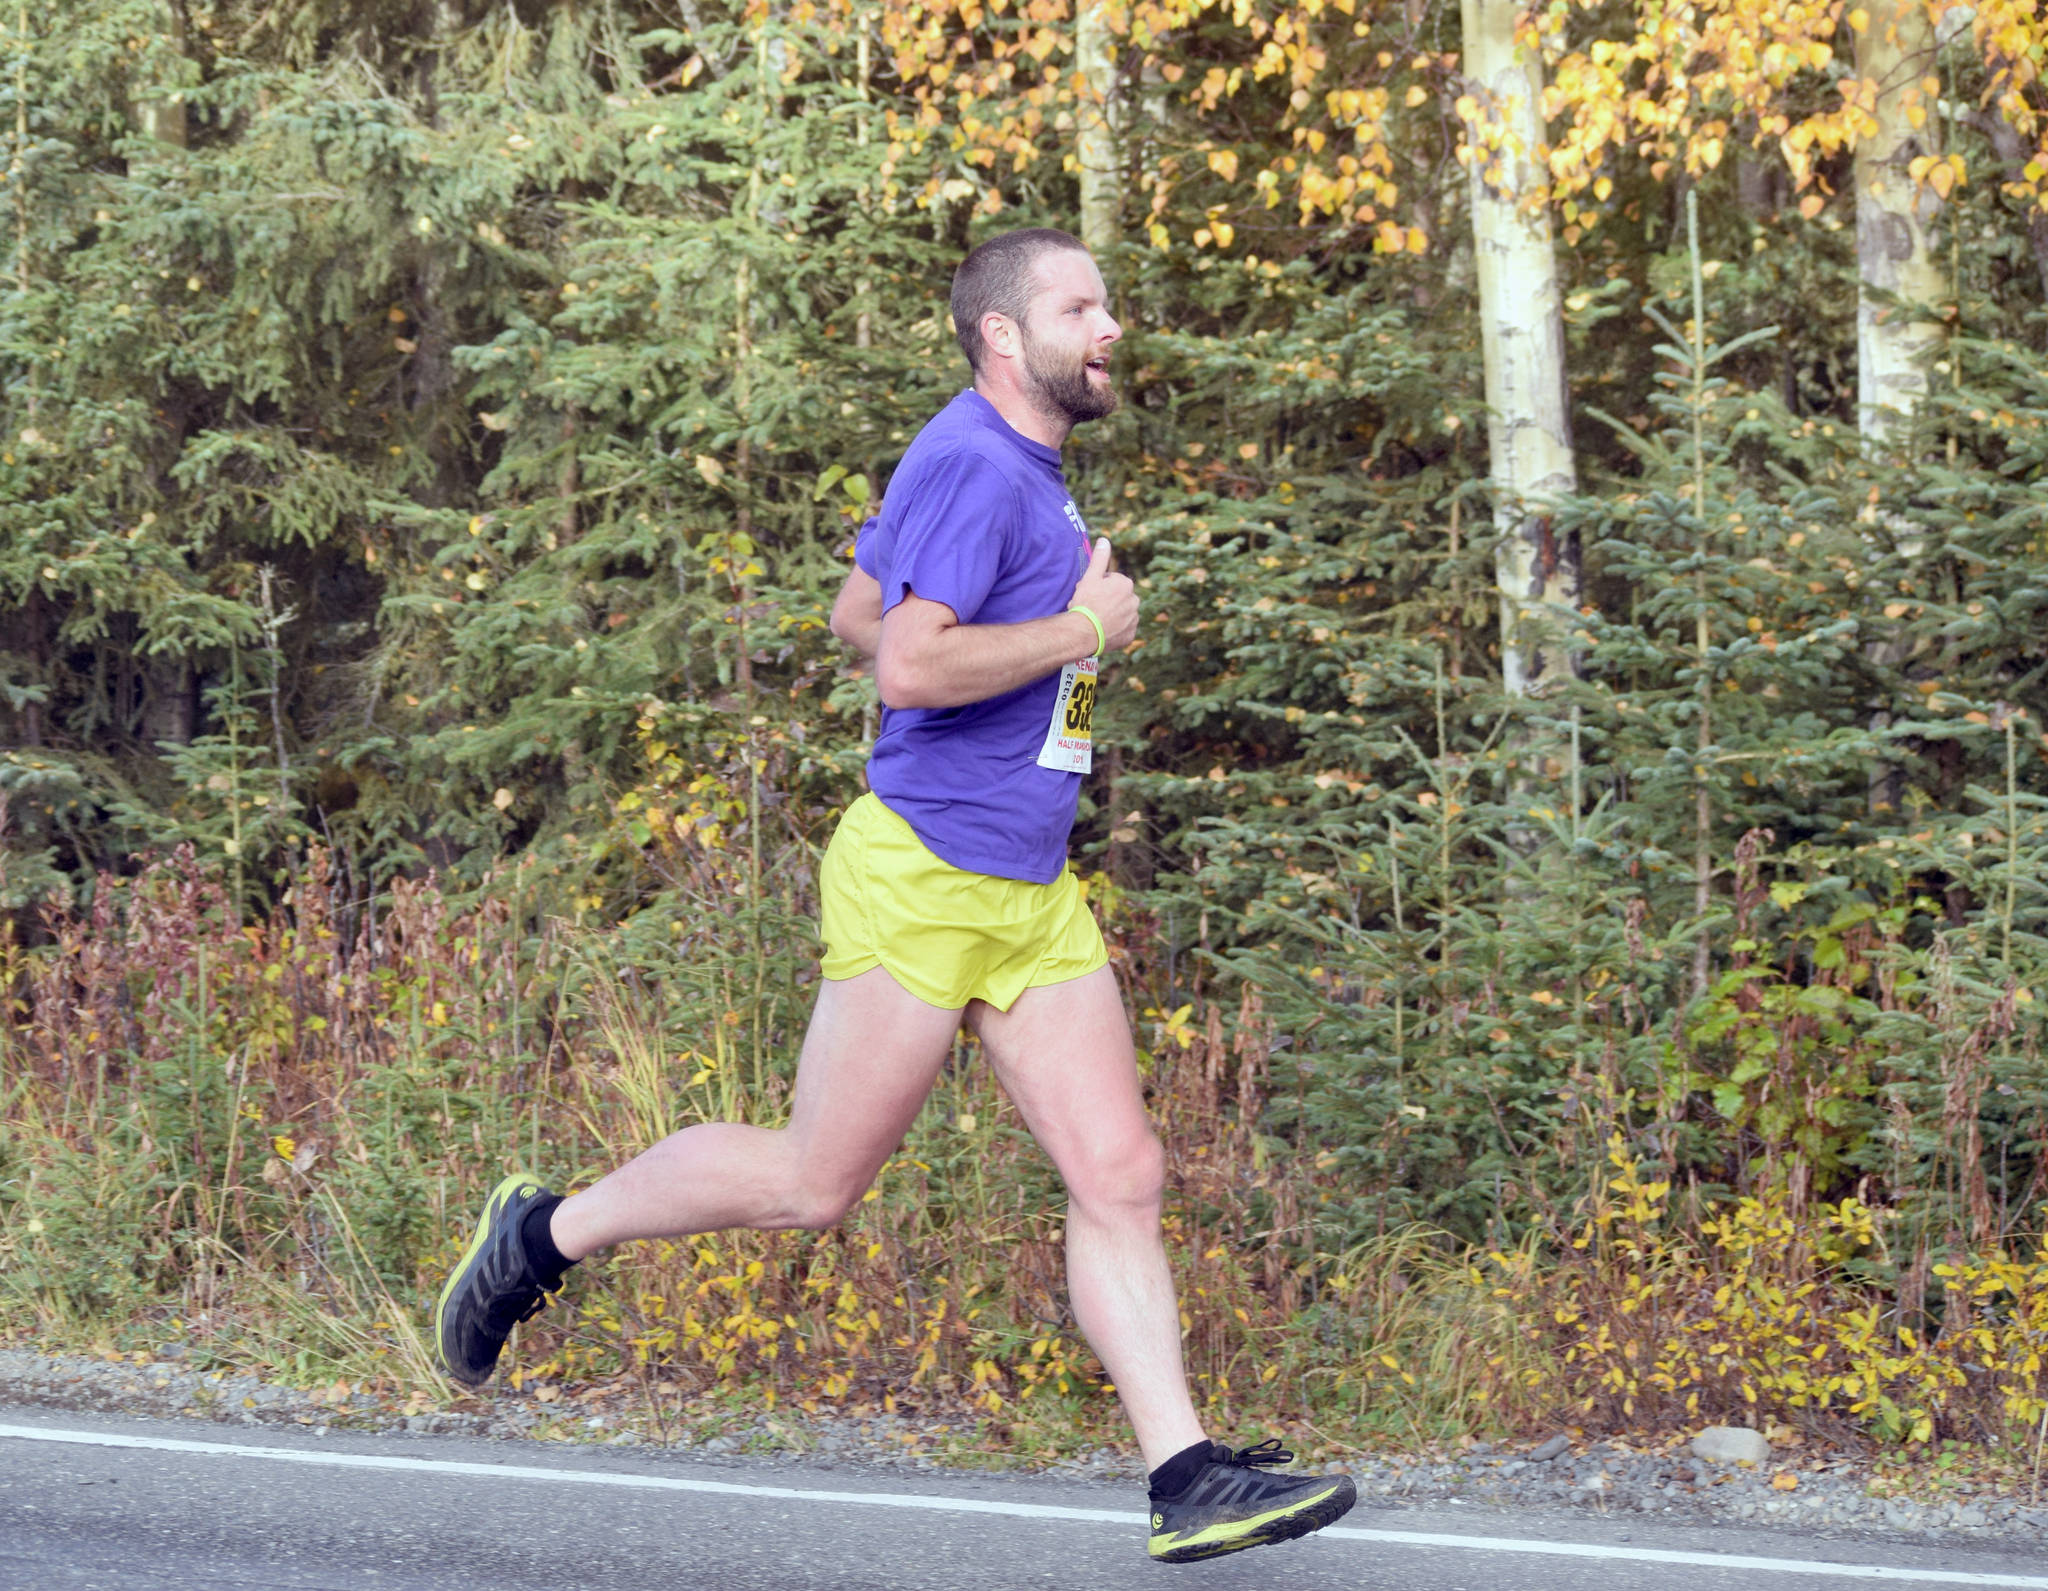 Seward’s Patrick Lewis strides down Beaver Loop Road on the way to a runner-up finish in the half marathon of the Kenai River Marathon on Sunday, Sept. 30, 2018. (Photo by Jeff Helminiak/Peninsula Clarion)